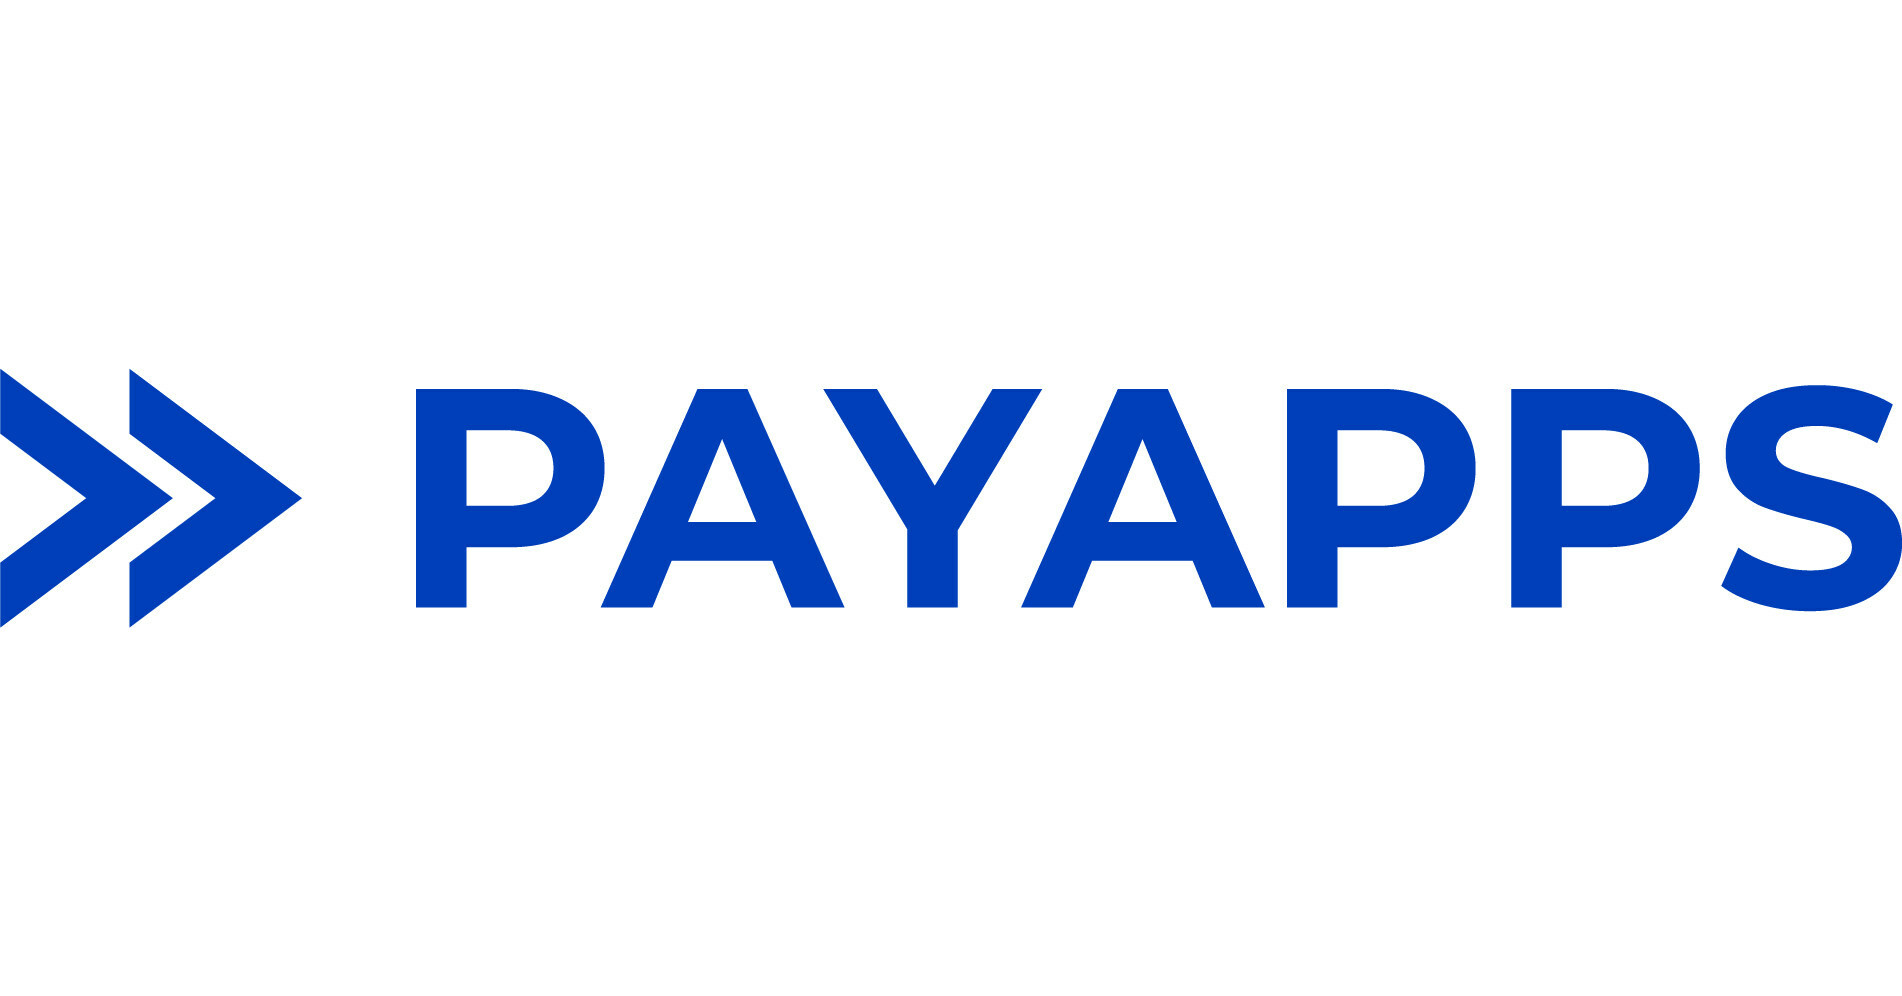 Payapps’ construction technology innovation wins two Stevie Awards in Asia Pacific